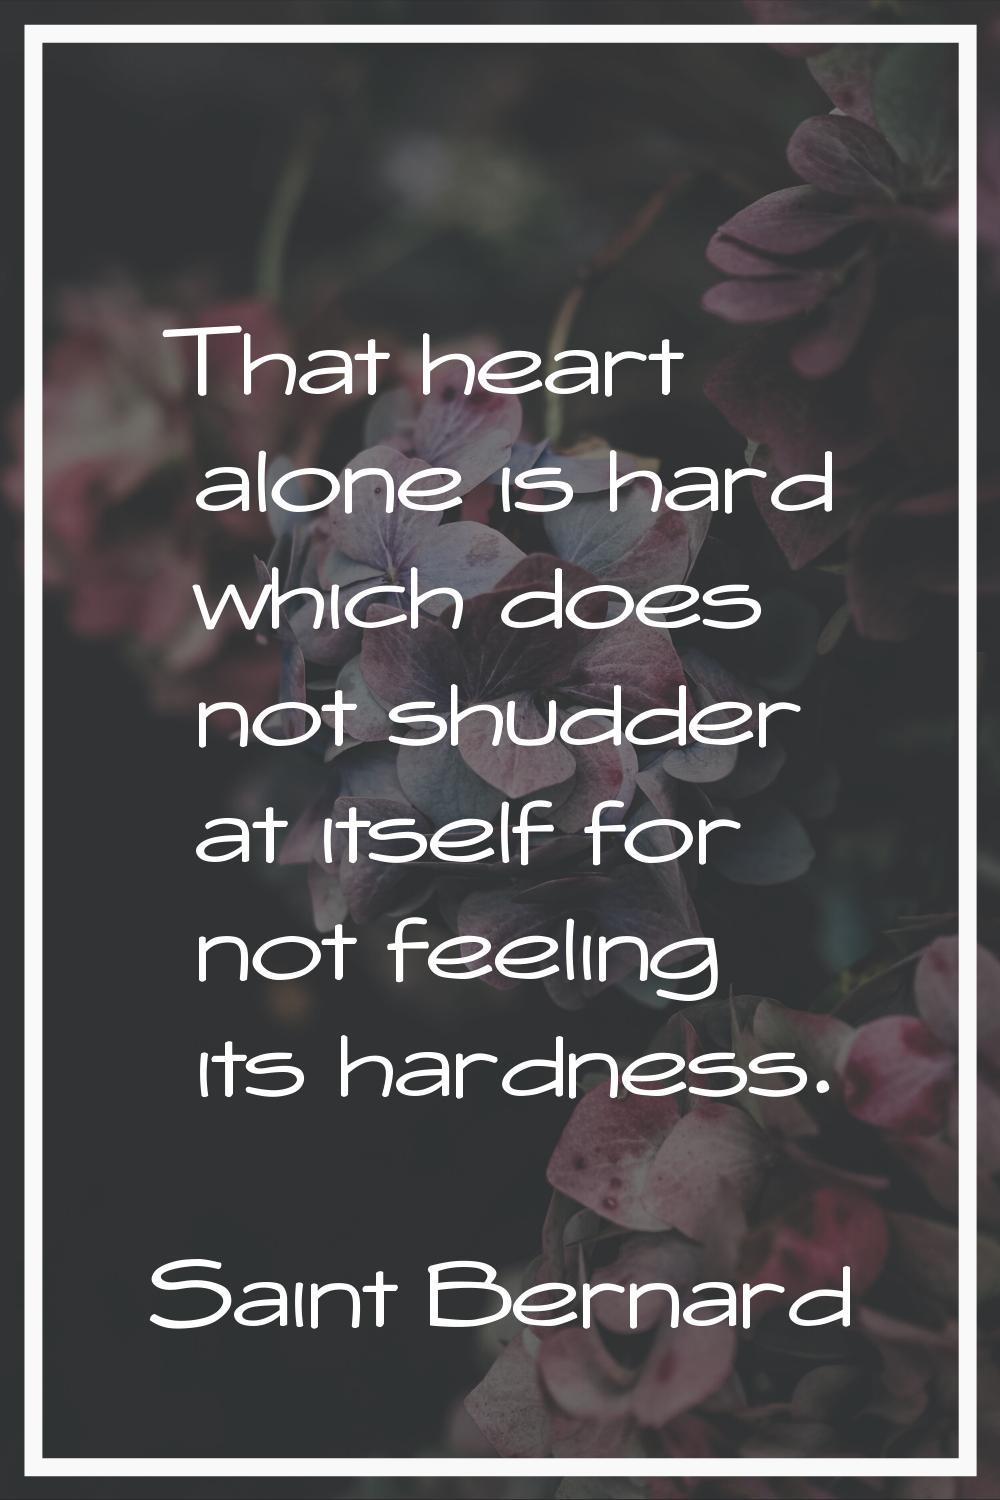 That heart alone is hard which does not shudder at itself for not feeling its hardness.